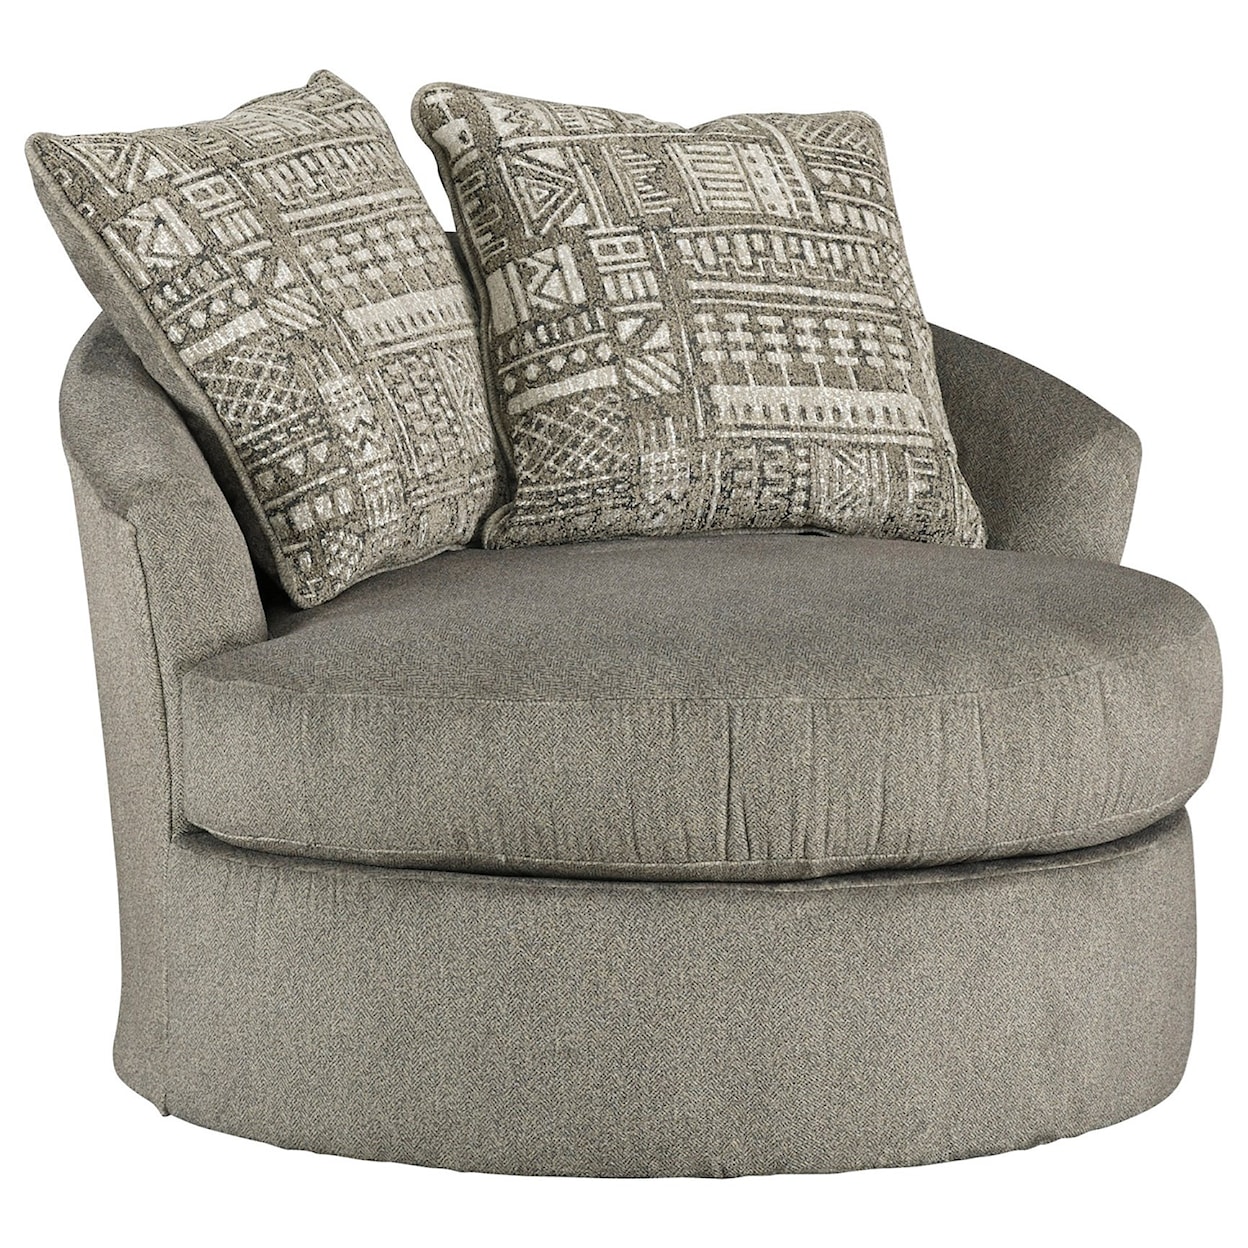 Signature Design by Ashley Soletren Swivel Accent Chair